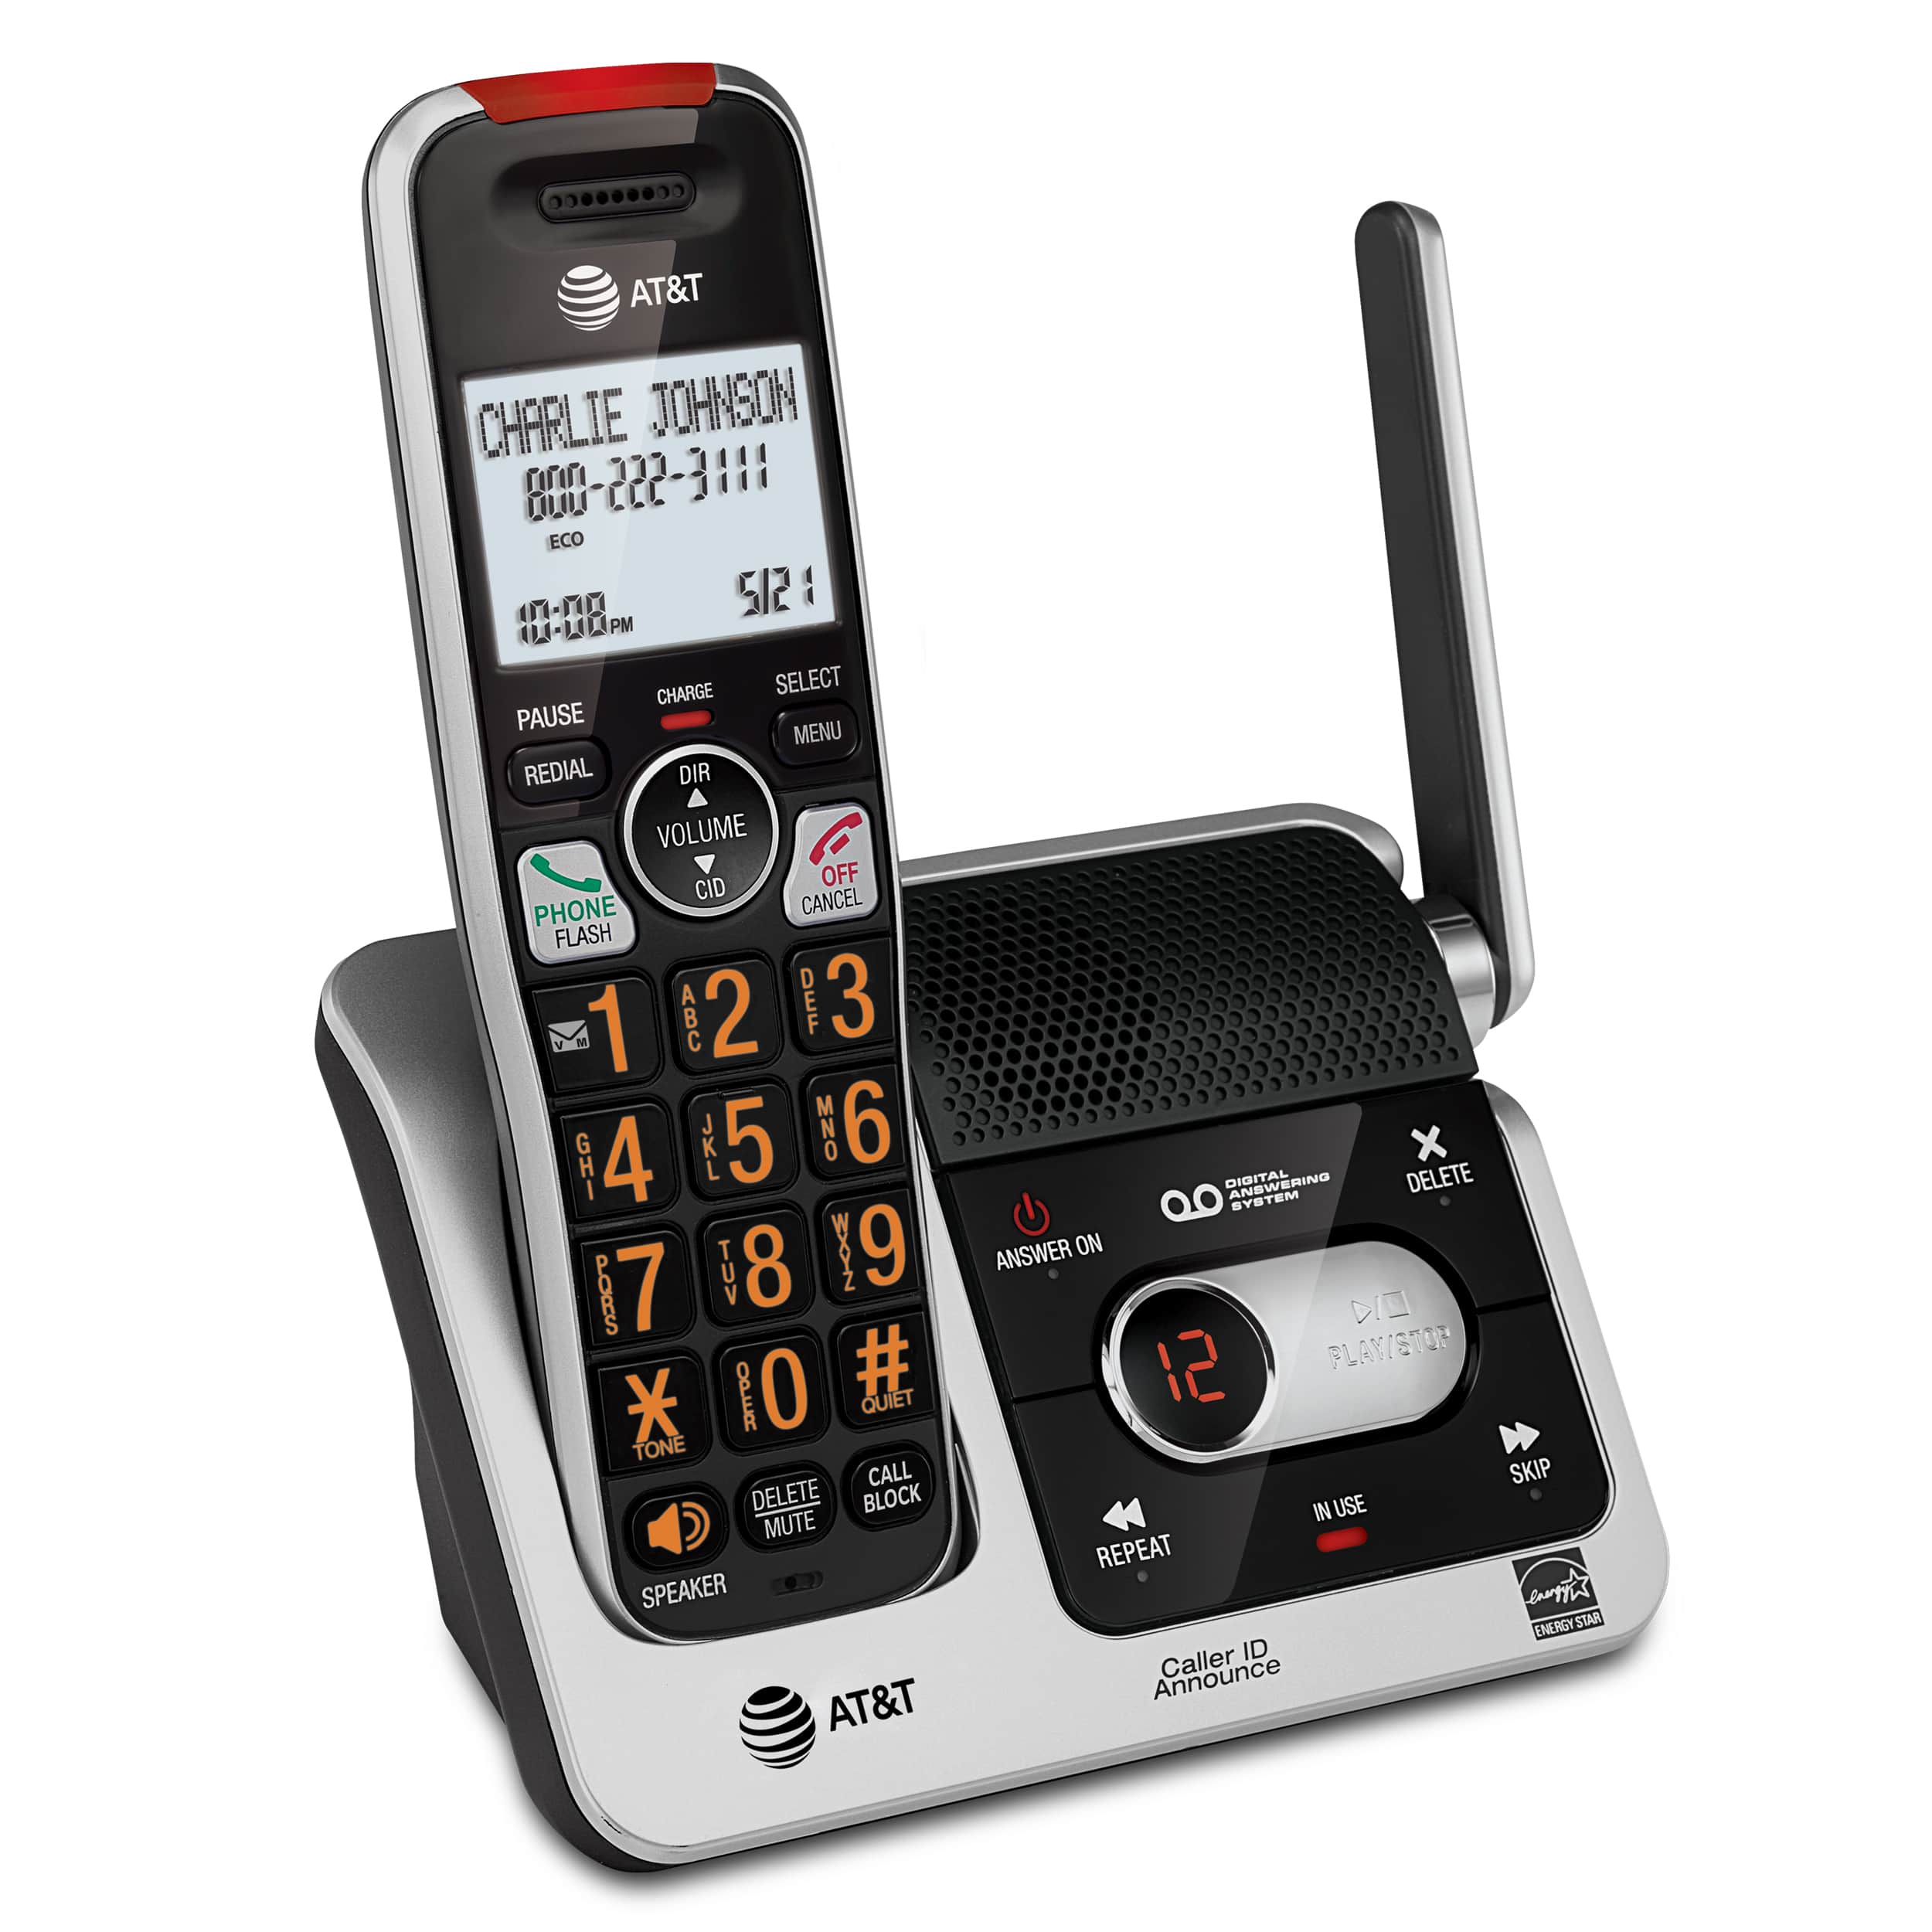 Cordless Phone with Unsurpassed Range, Smart Call Blocker and Answering System - view 9